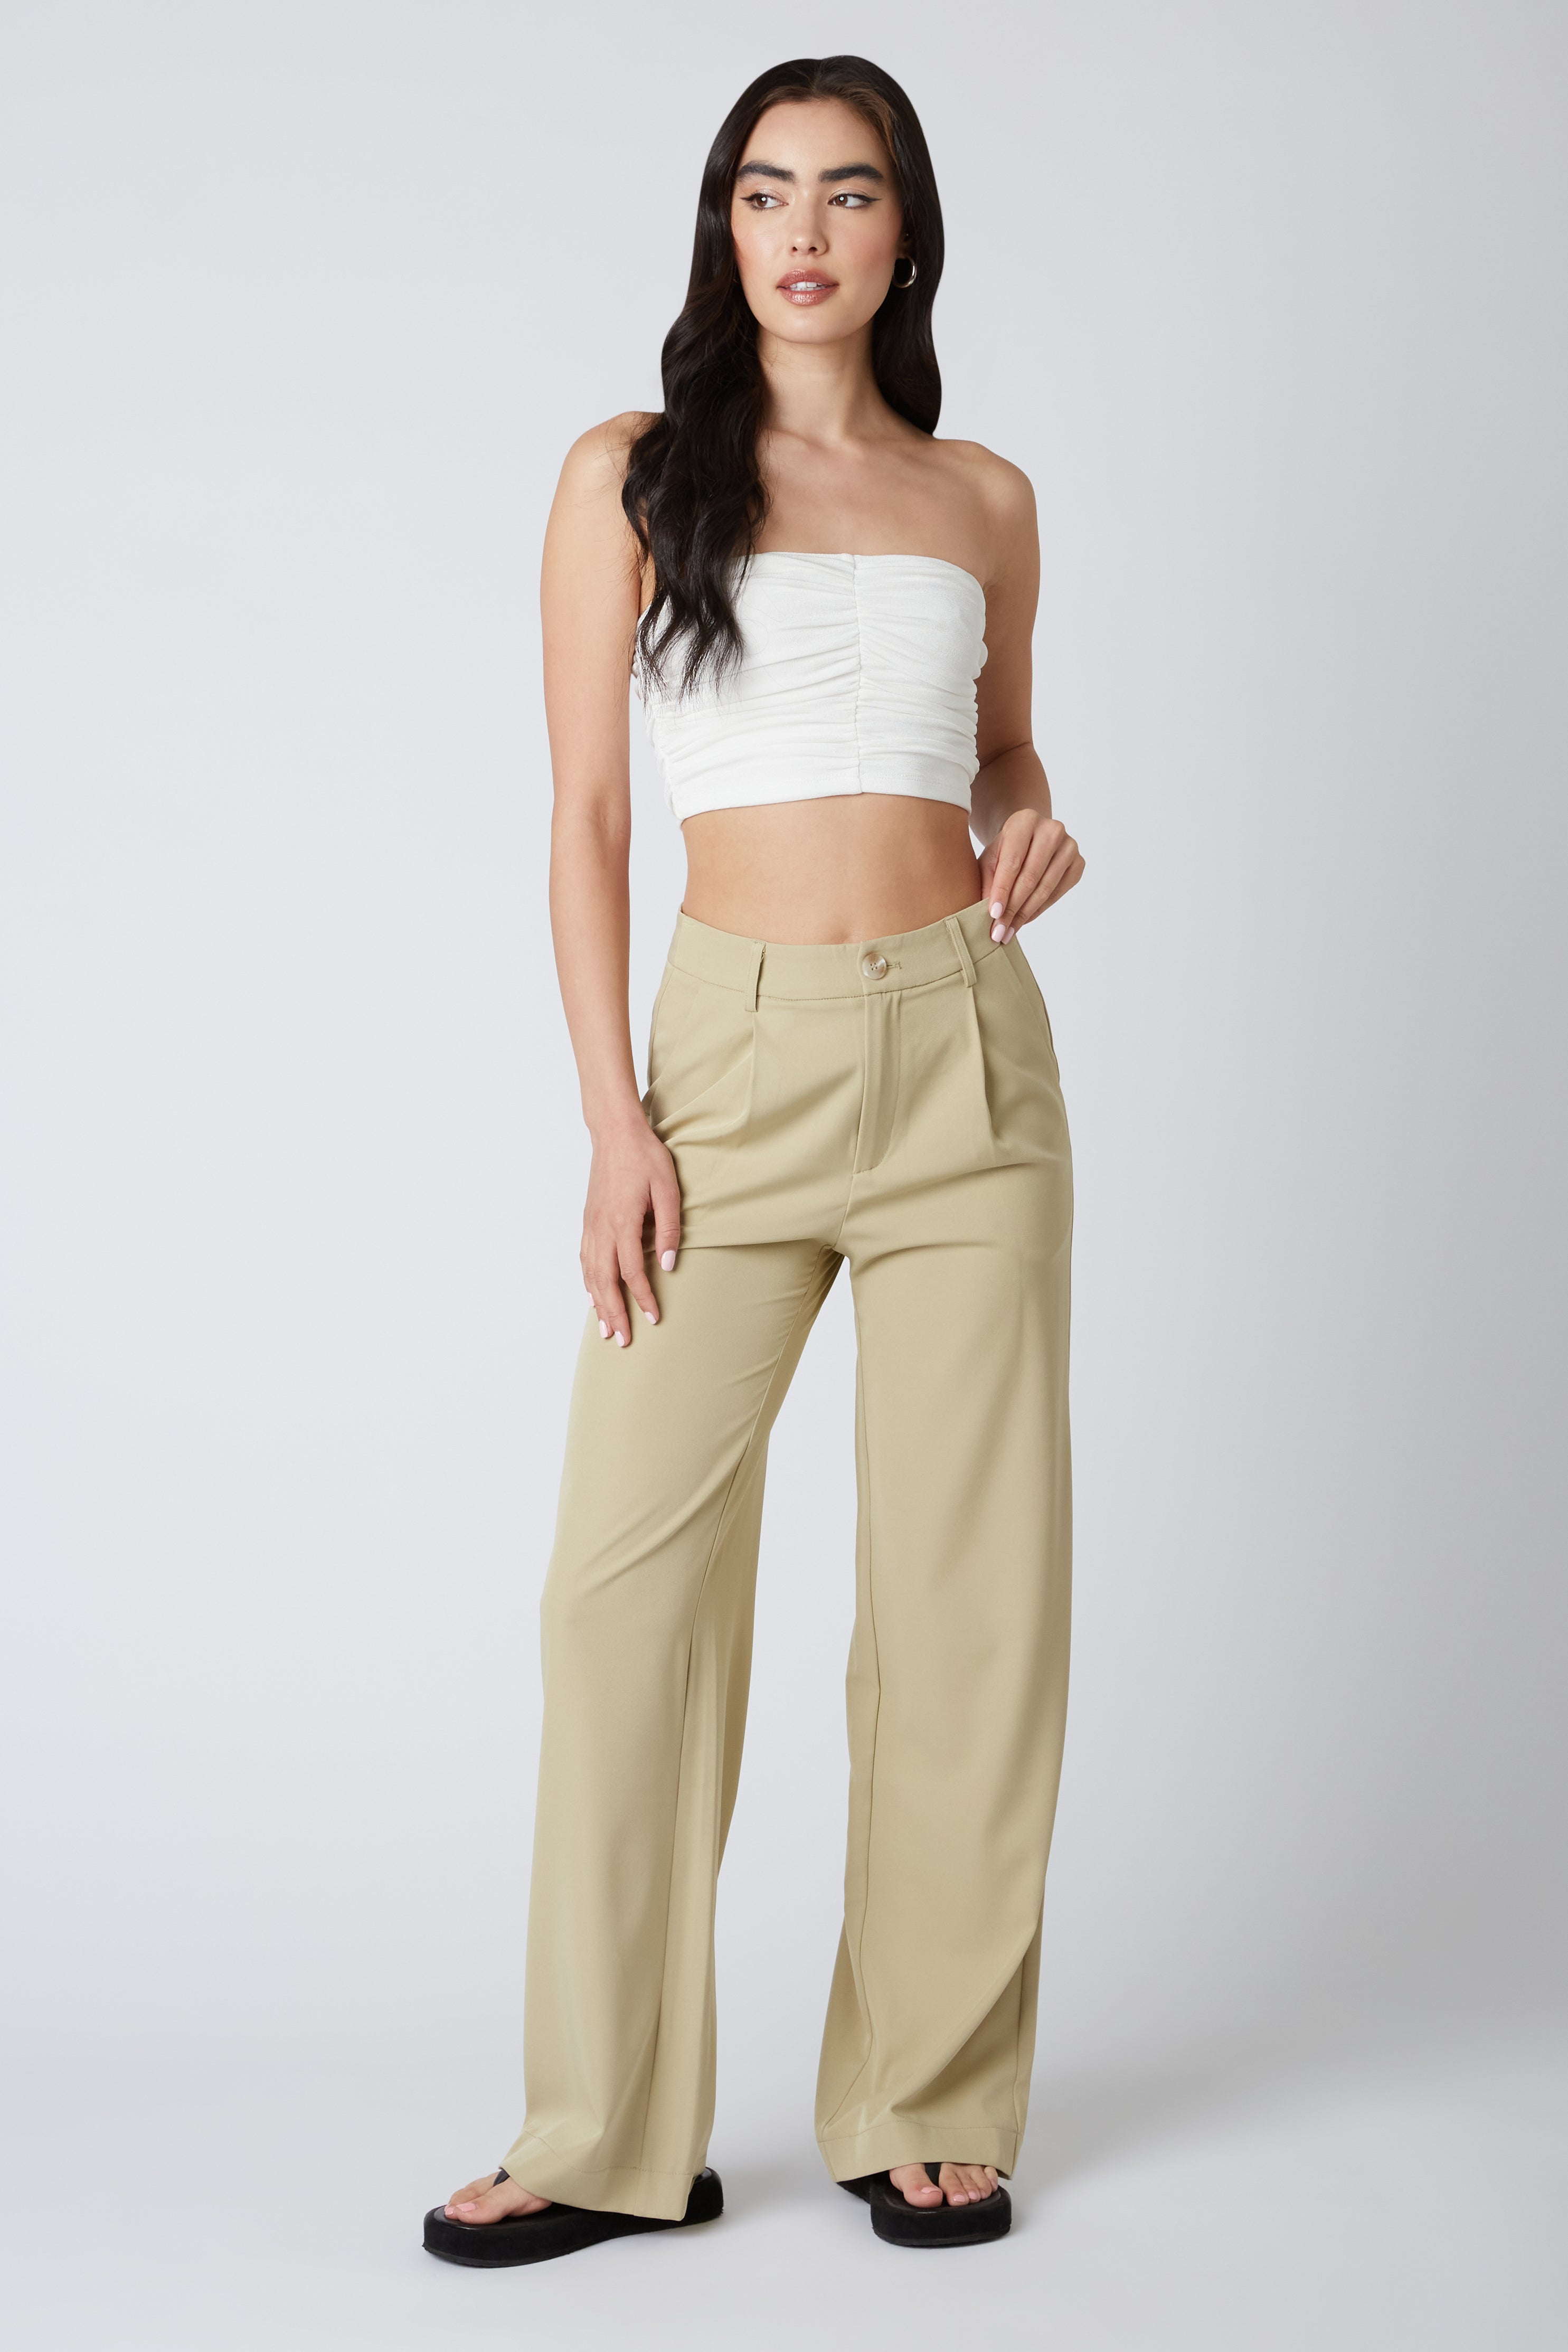 80s Lee Casuals Cotton Pleated Trousers - XS to Small, 25.5